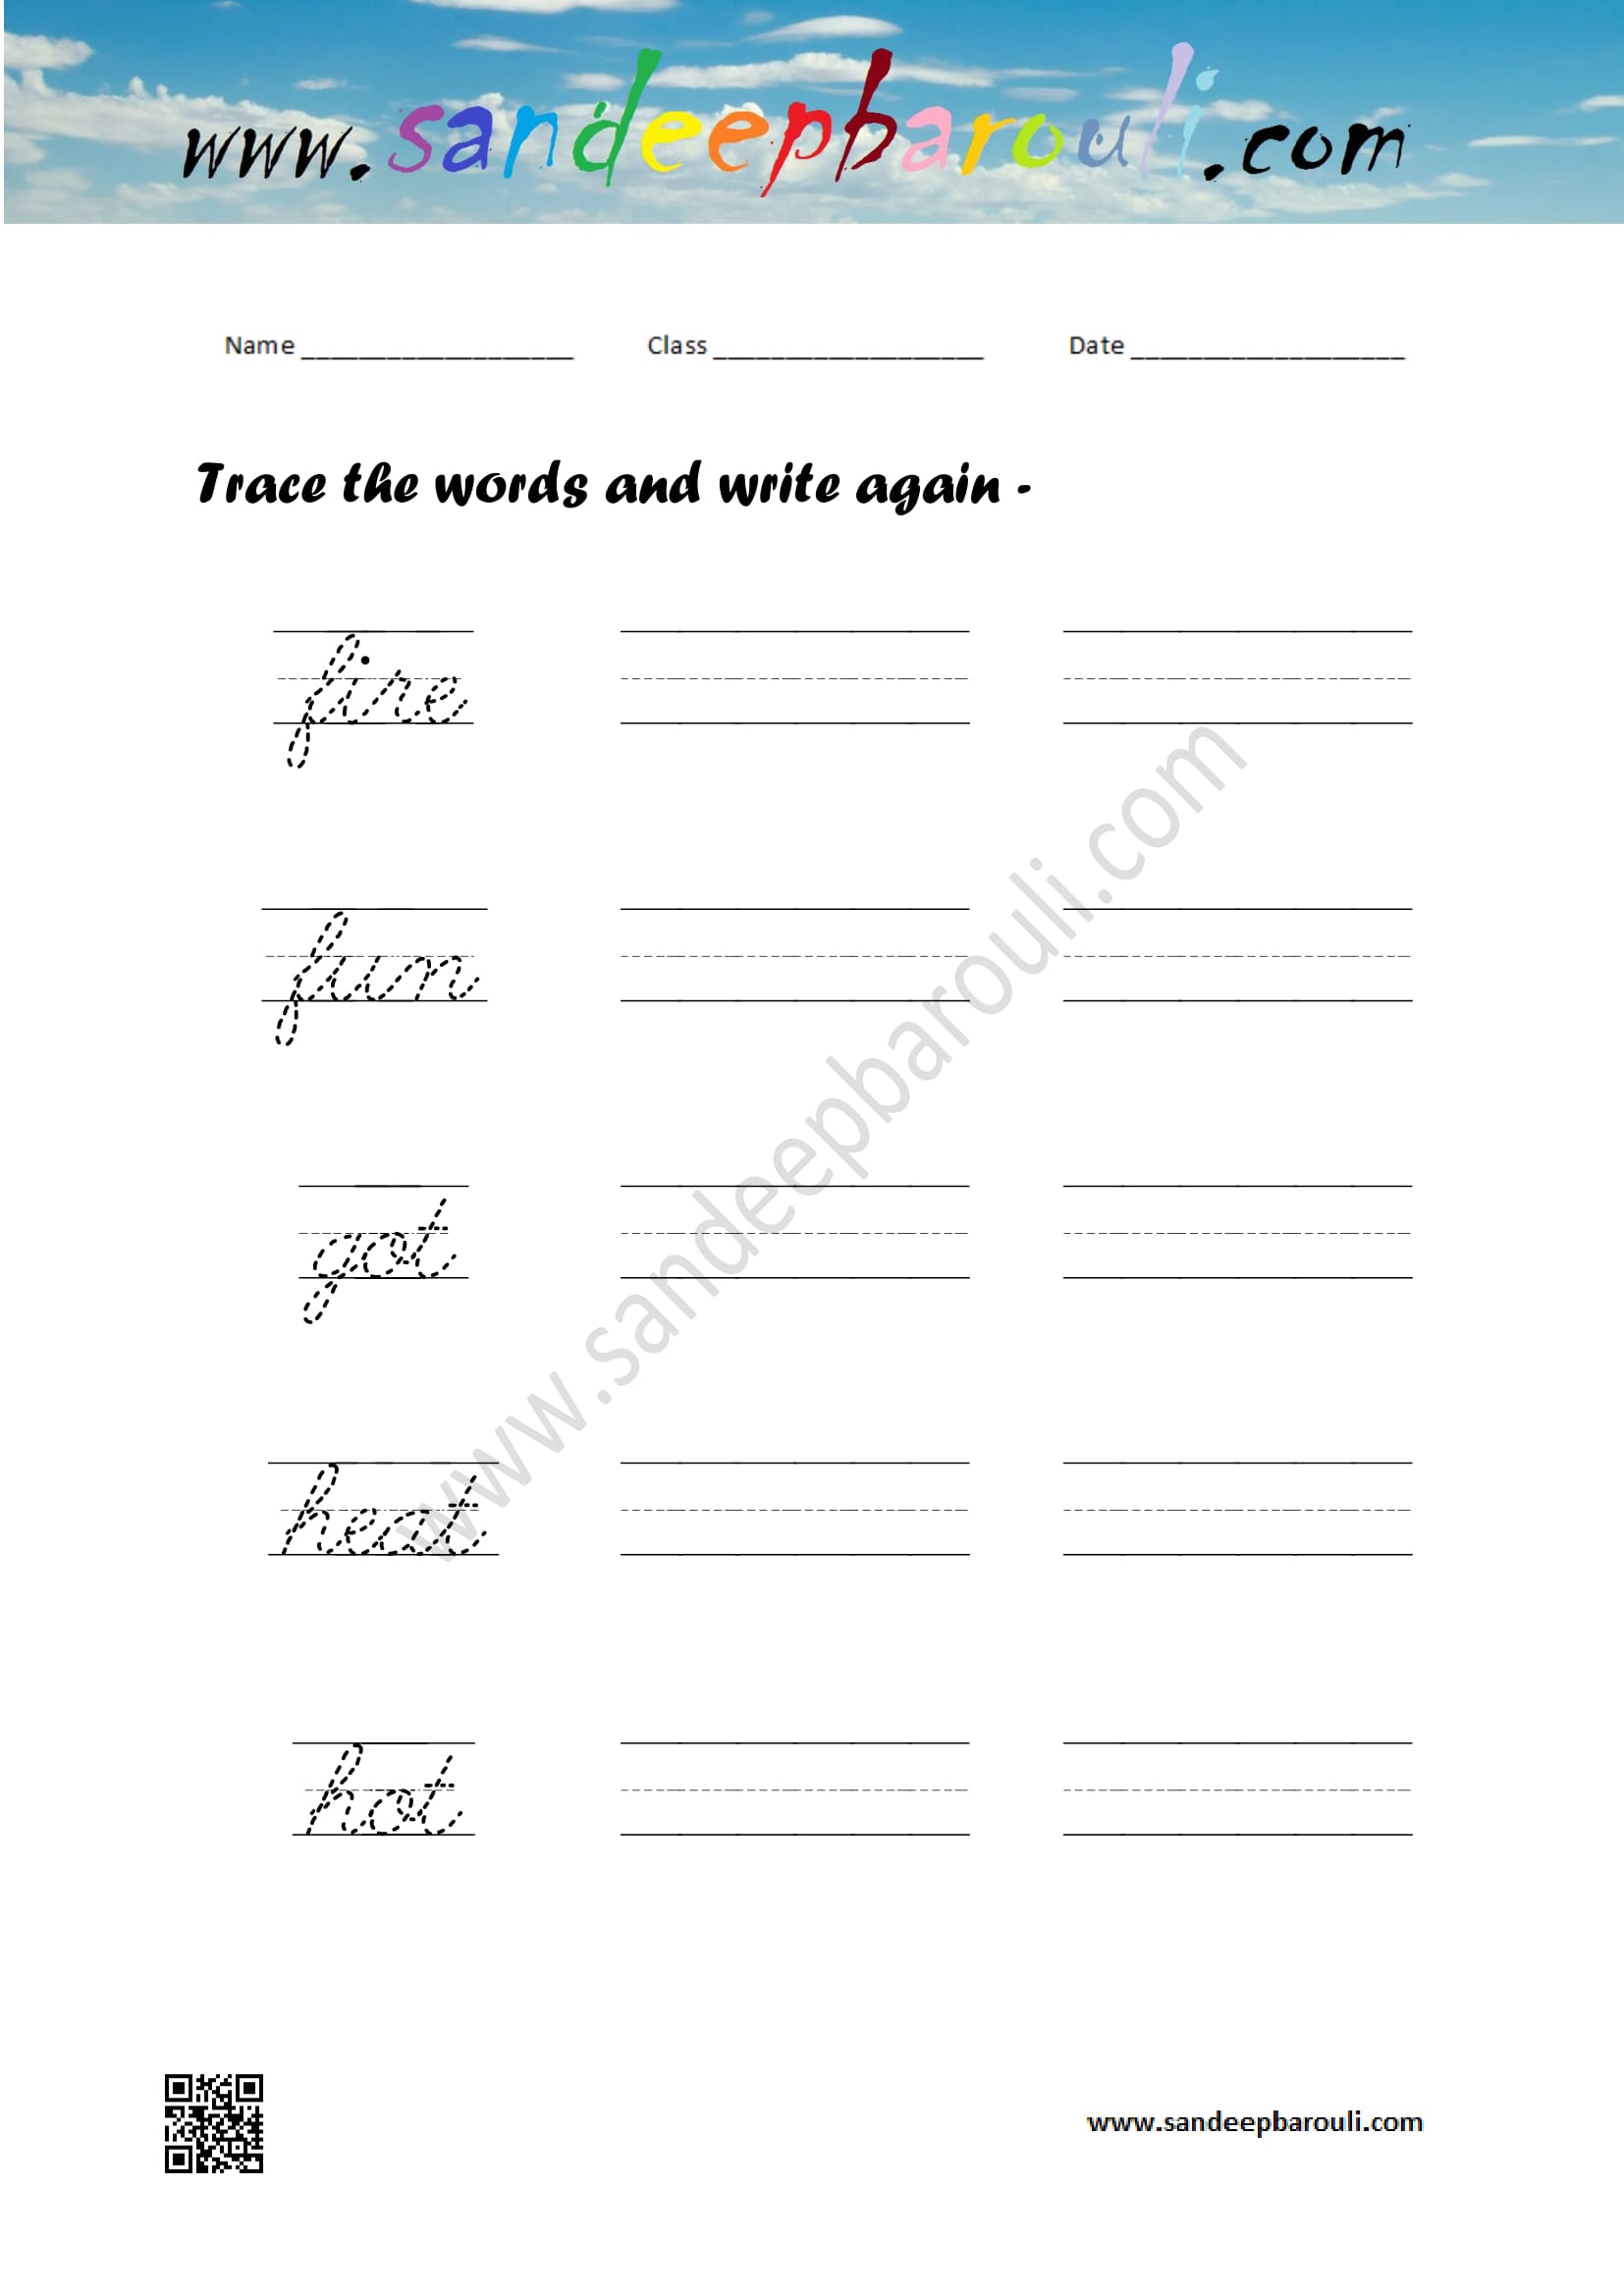 Cursive writing worksheet – trace the words and write again (35)